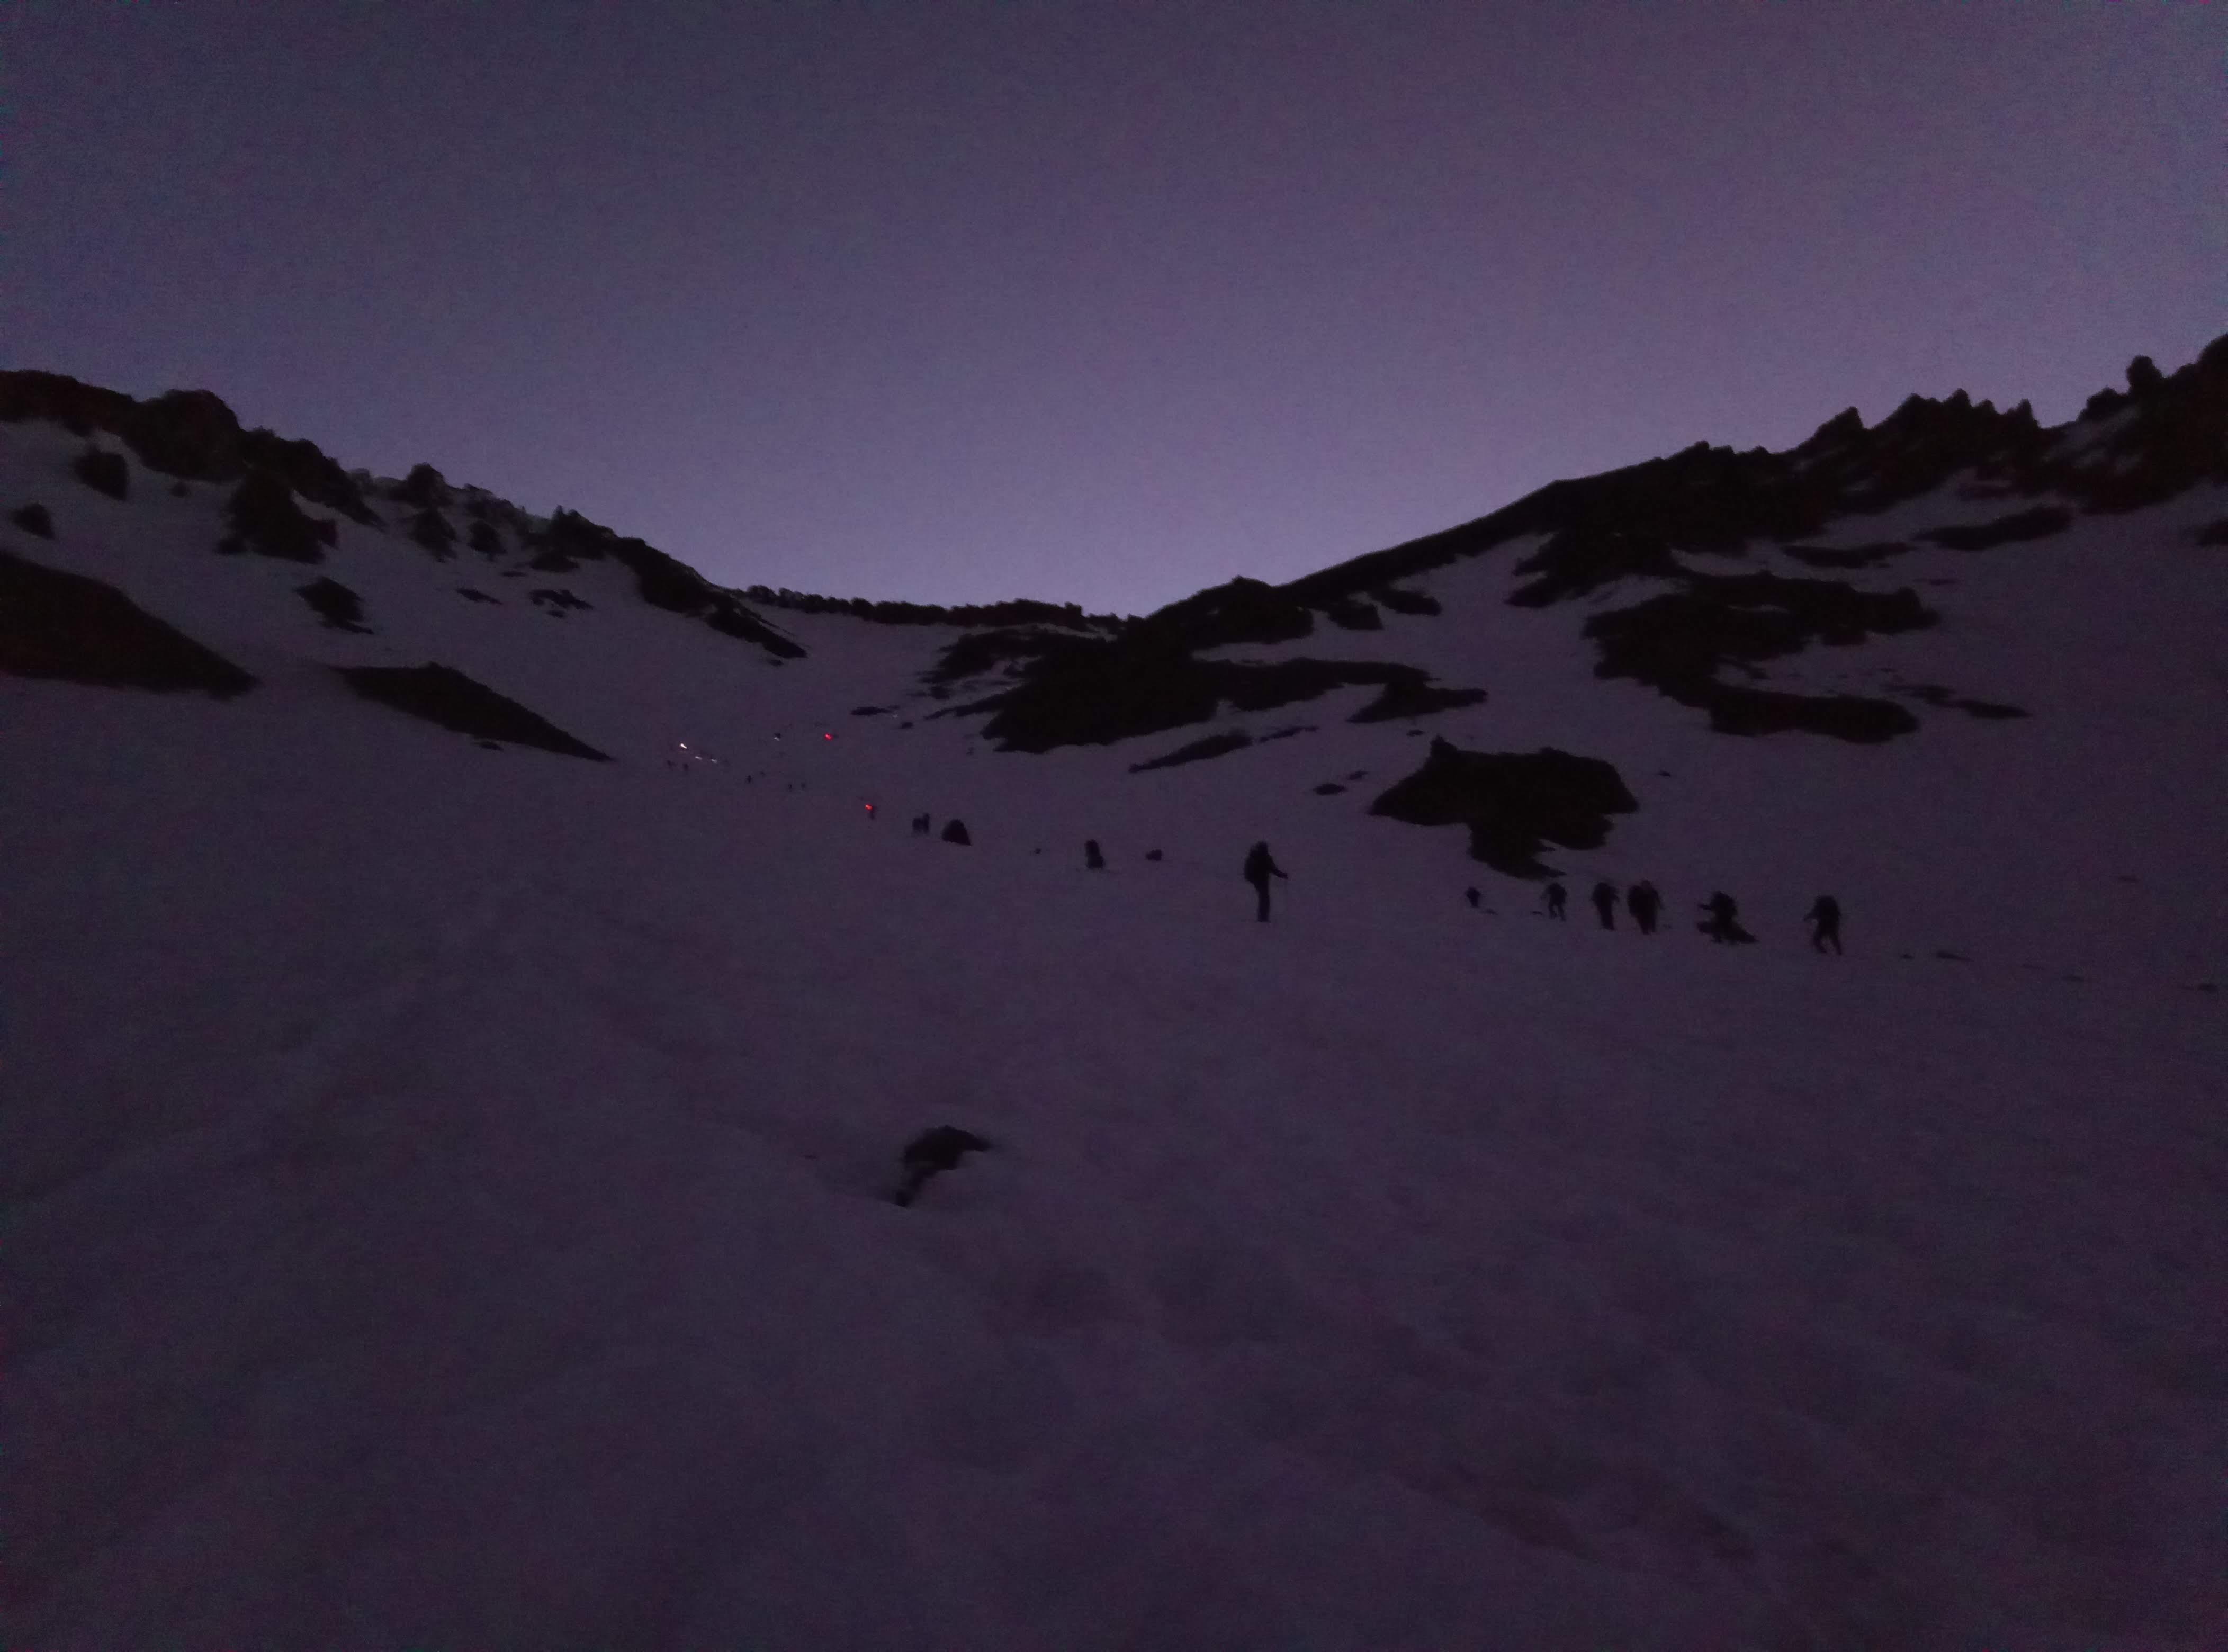 Avalanche gulch, early morning